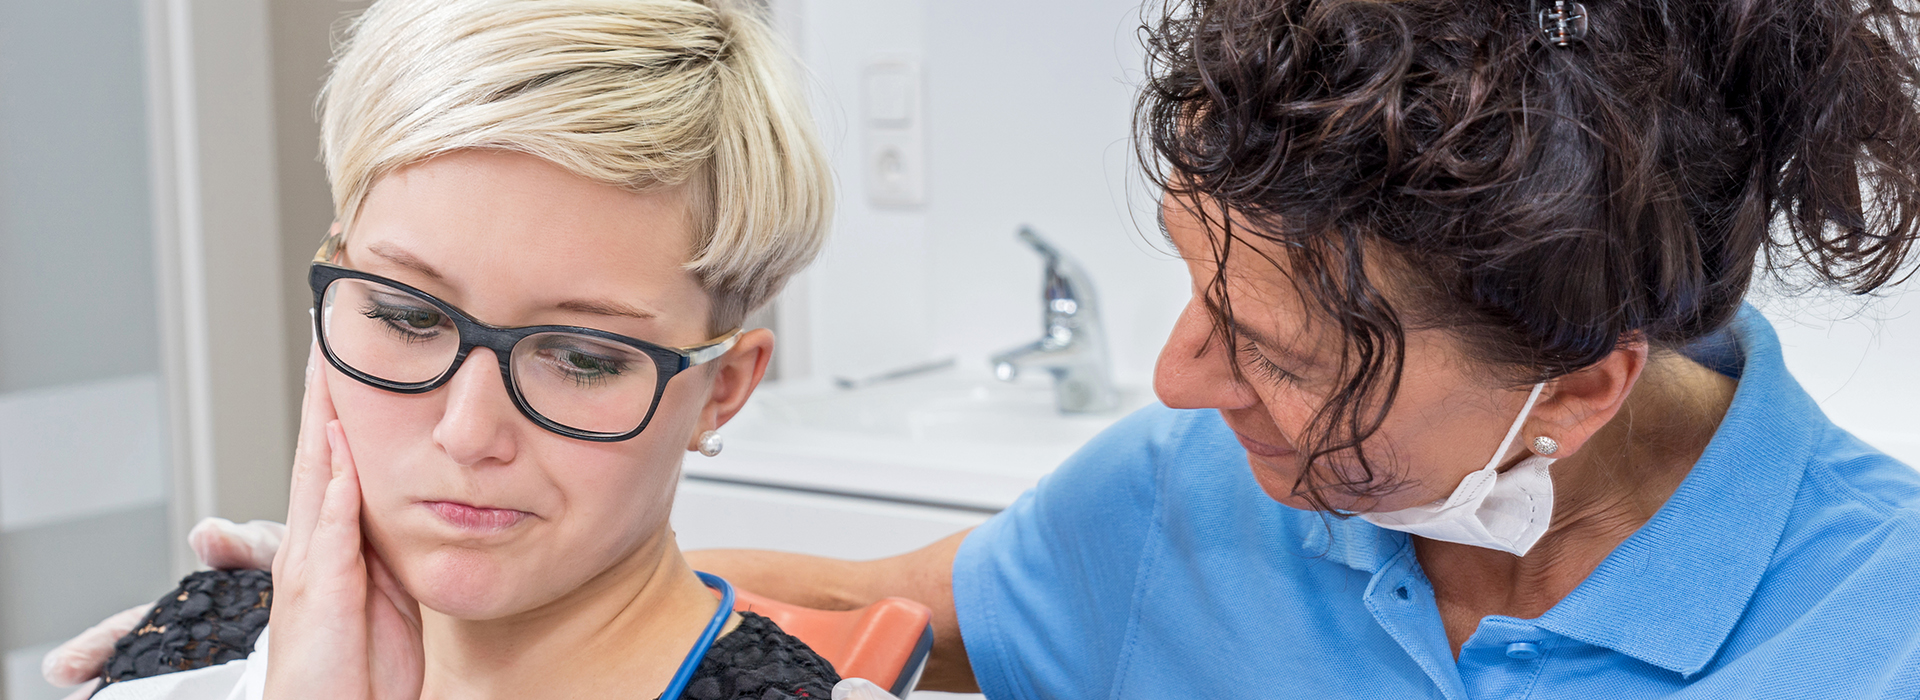 North Texas Dental Care | Sedation Dentistry, Oral Exams and Root Canals